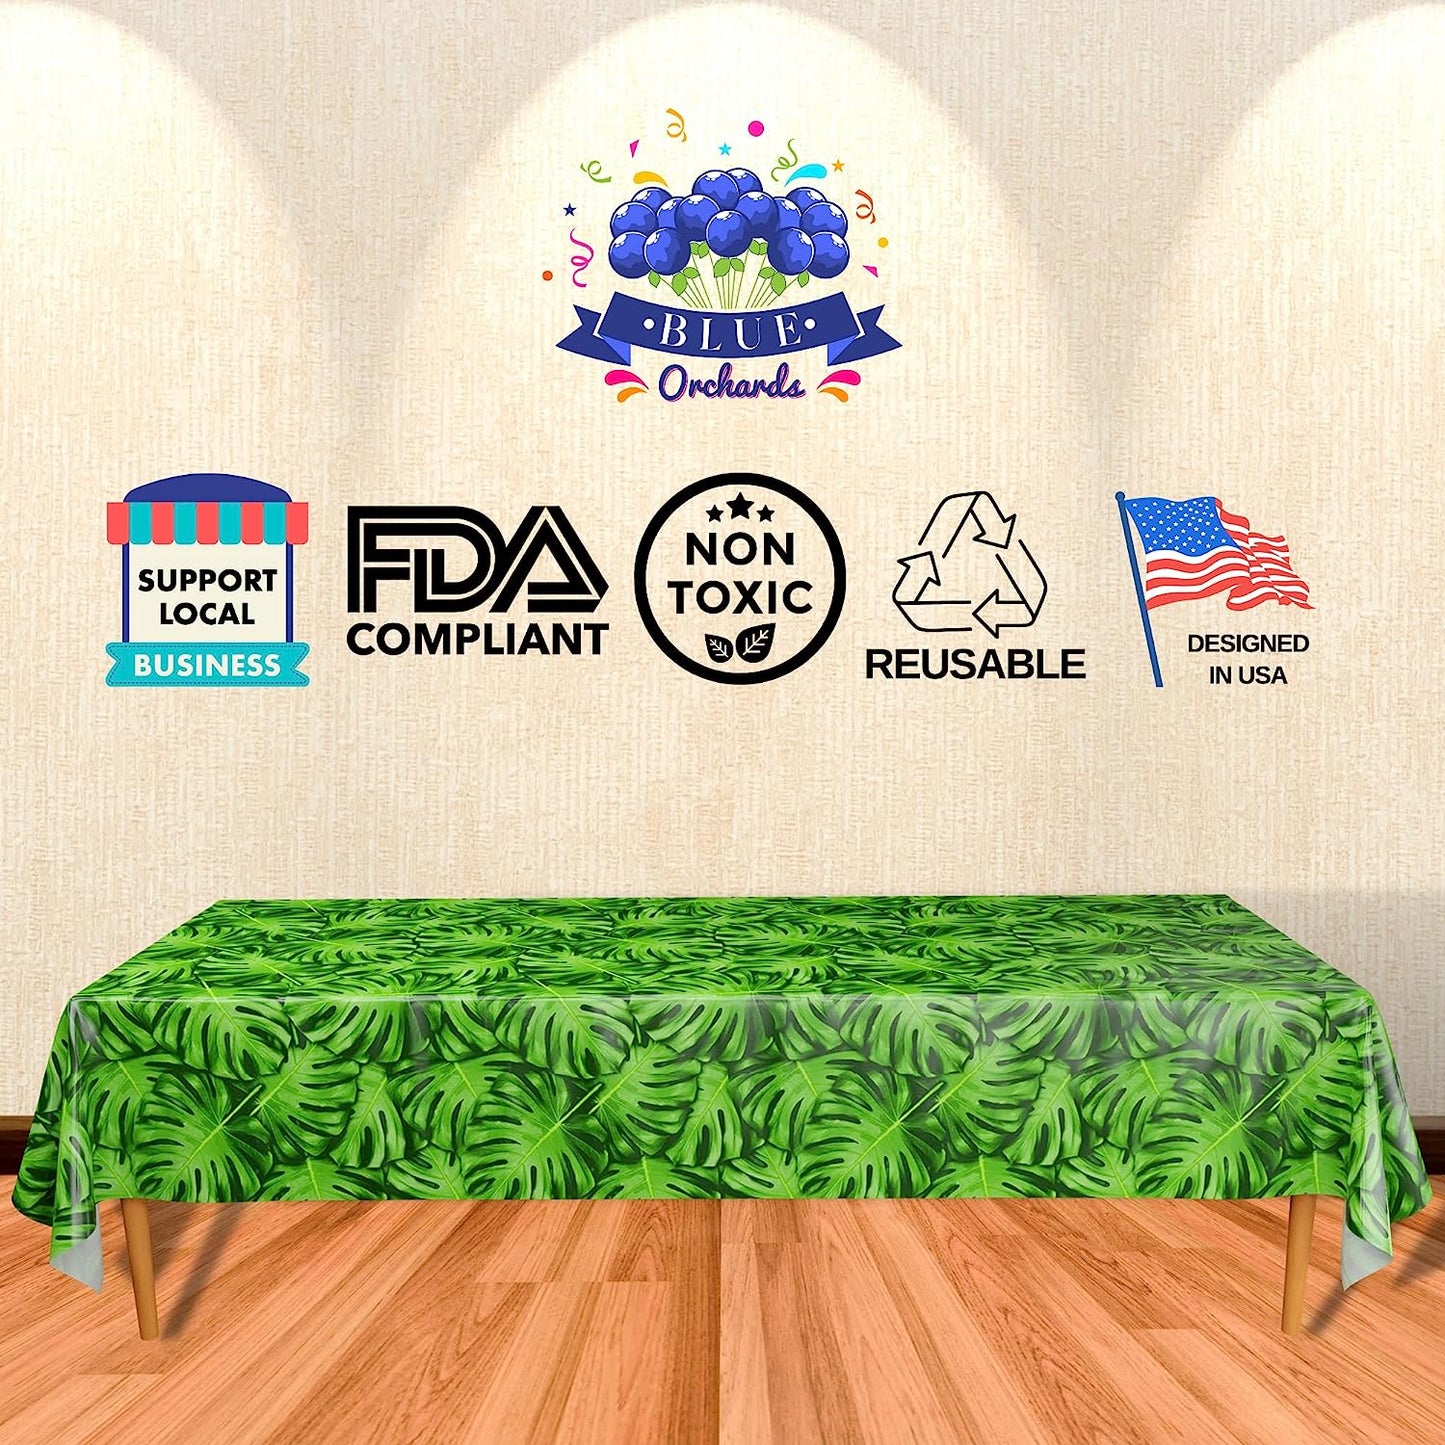 Two FDA Compliant, non toxic, reusable, and designed in USA palm leaf patterned table covers, each measuring approximately 108 inches by 54 inches, displayed on a wooden table with a white background.